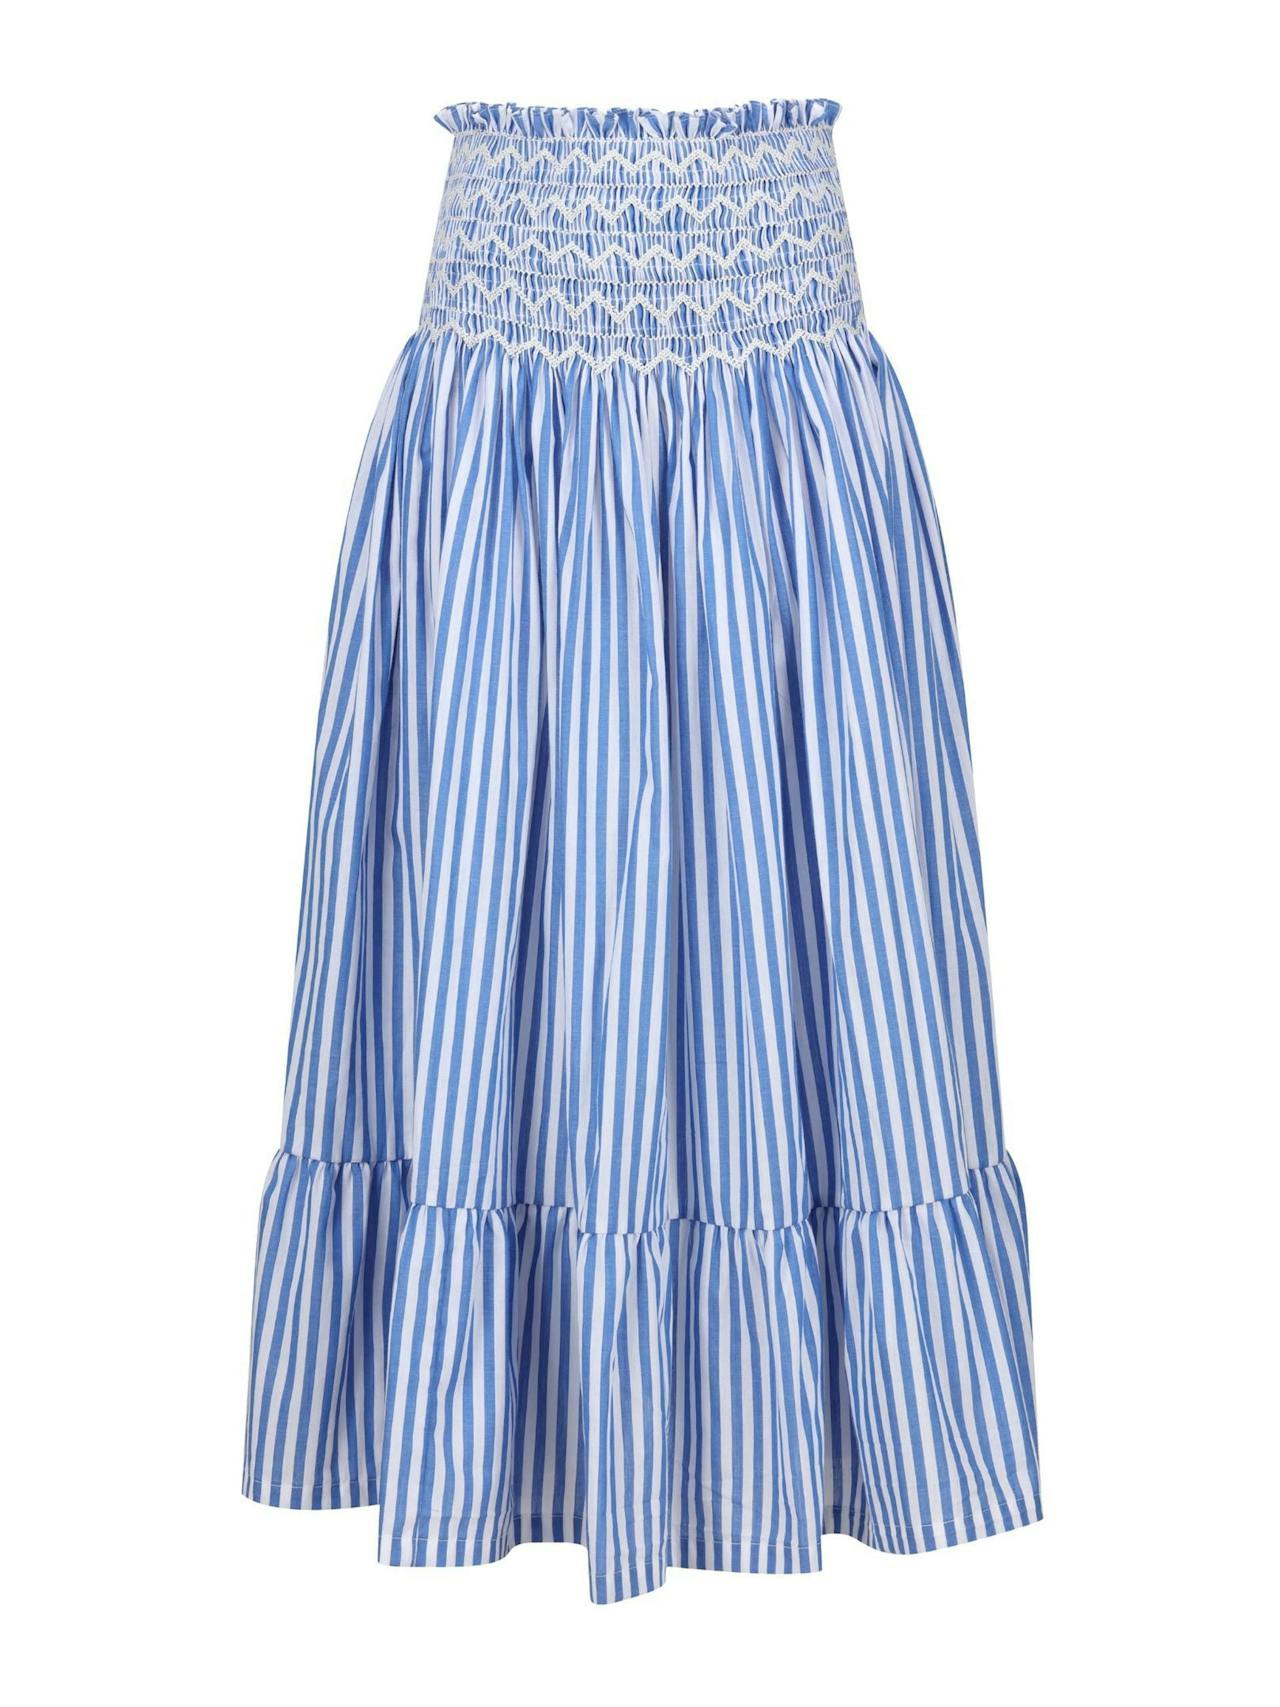 Mary stopes skirt sapphire stripes with icecap hand smocking